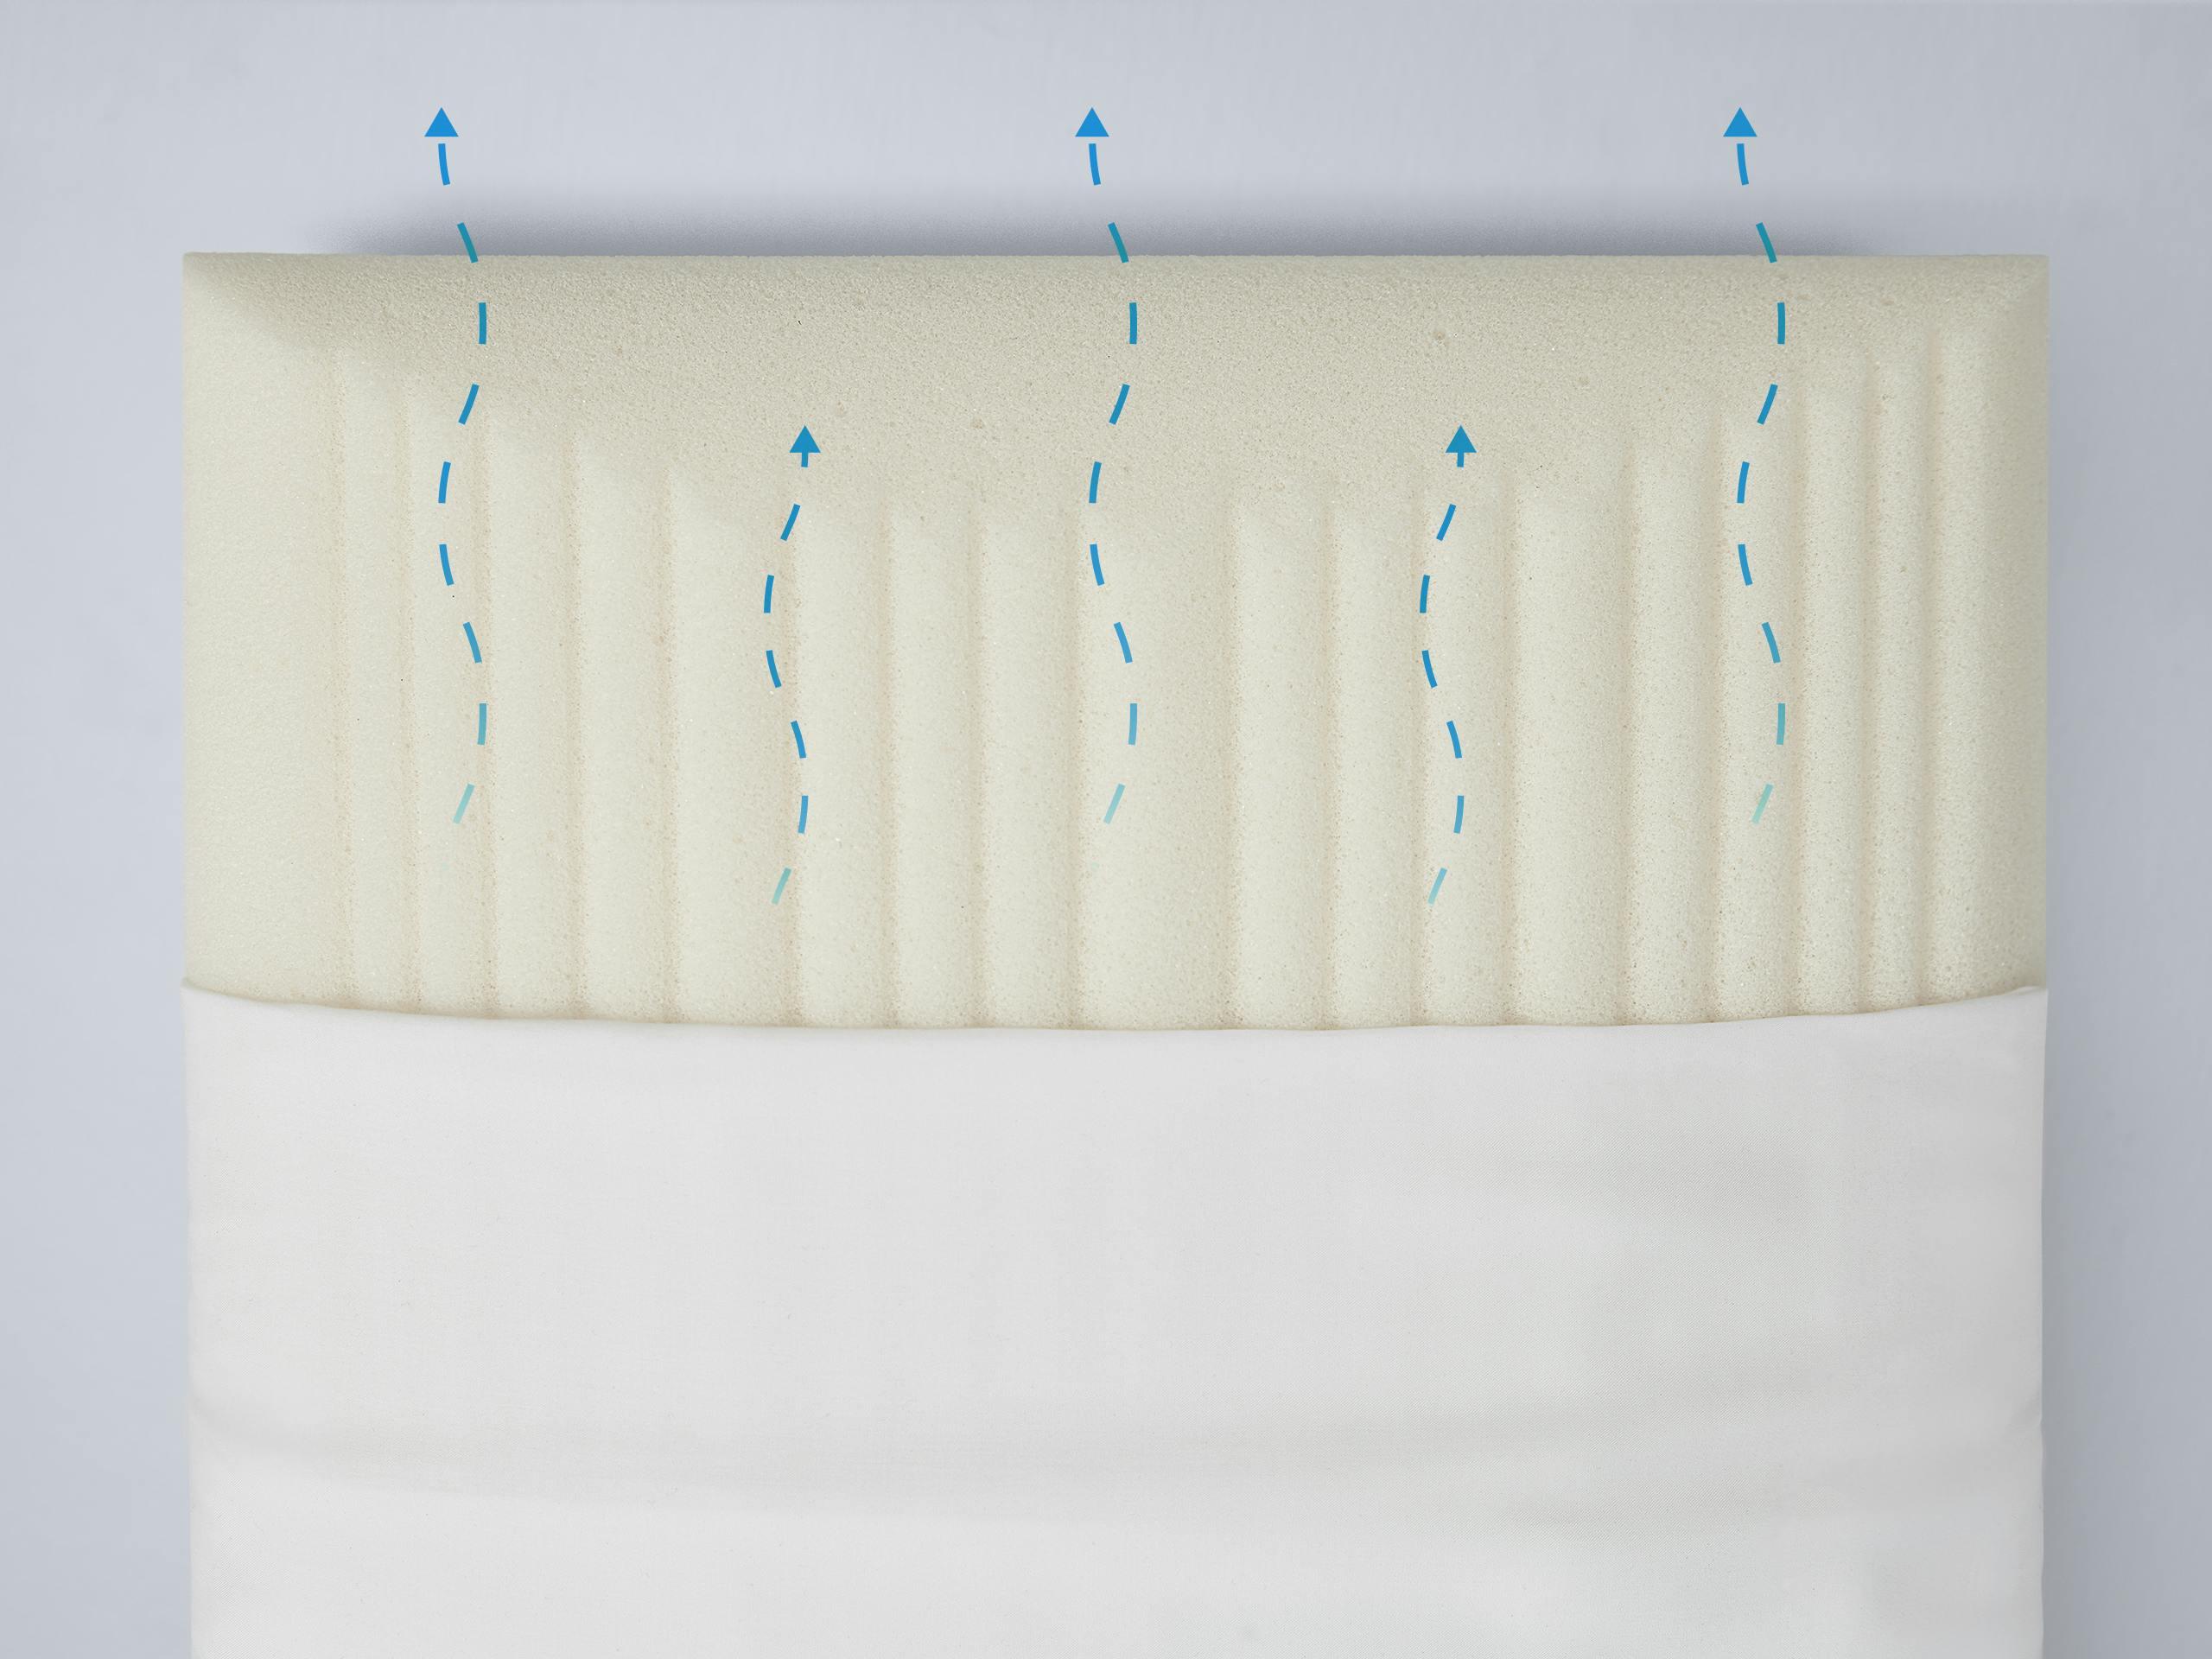 Pillow showing the AntiGravity Surface Foam with air lines dissipating away from the foam.